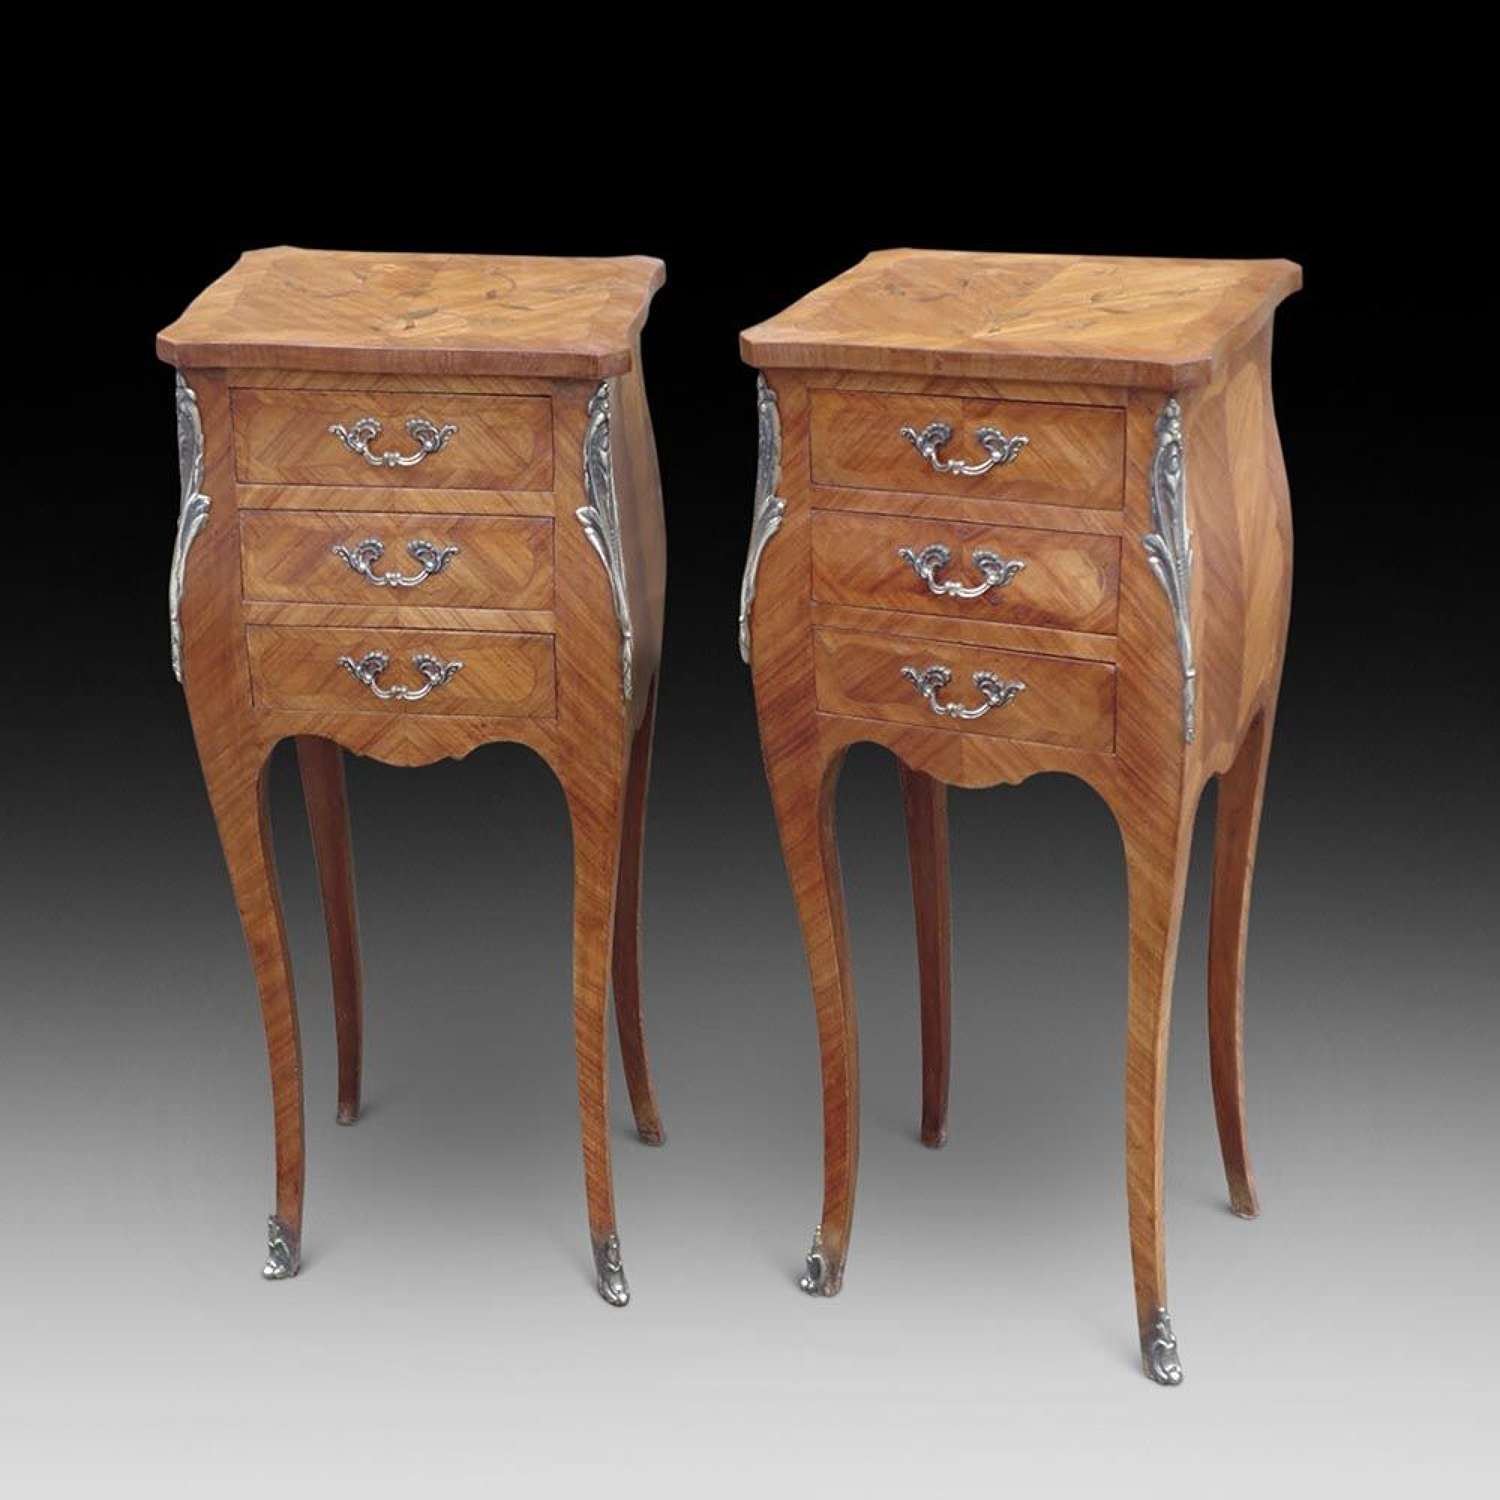 Pair of Kingwood Marquetry Bedside Cabinets c.1890